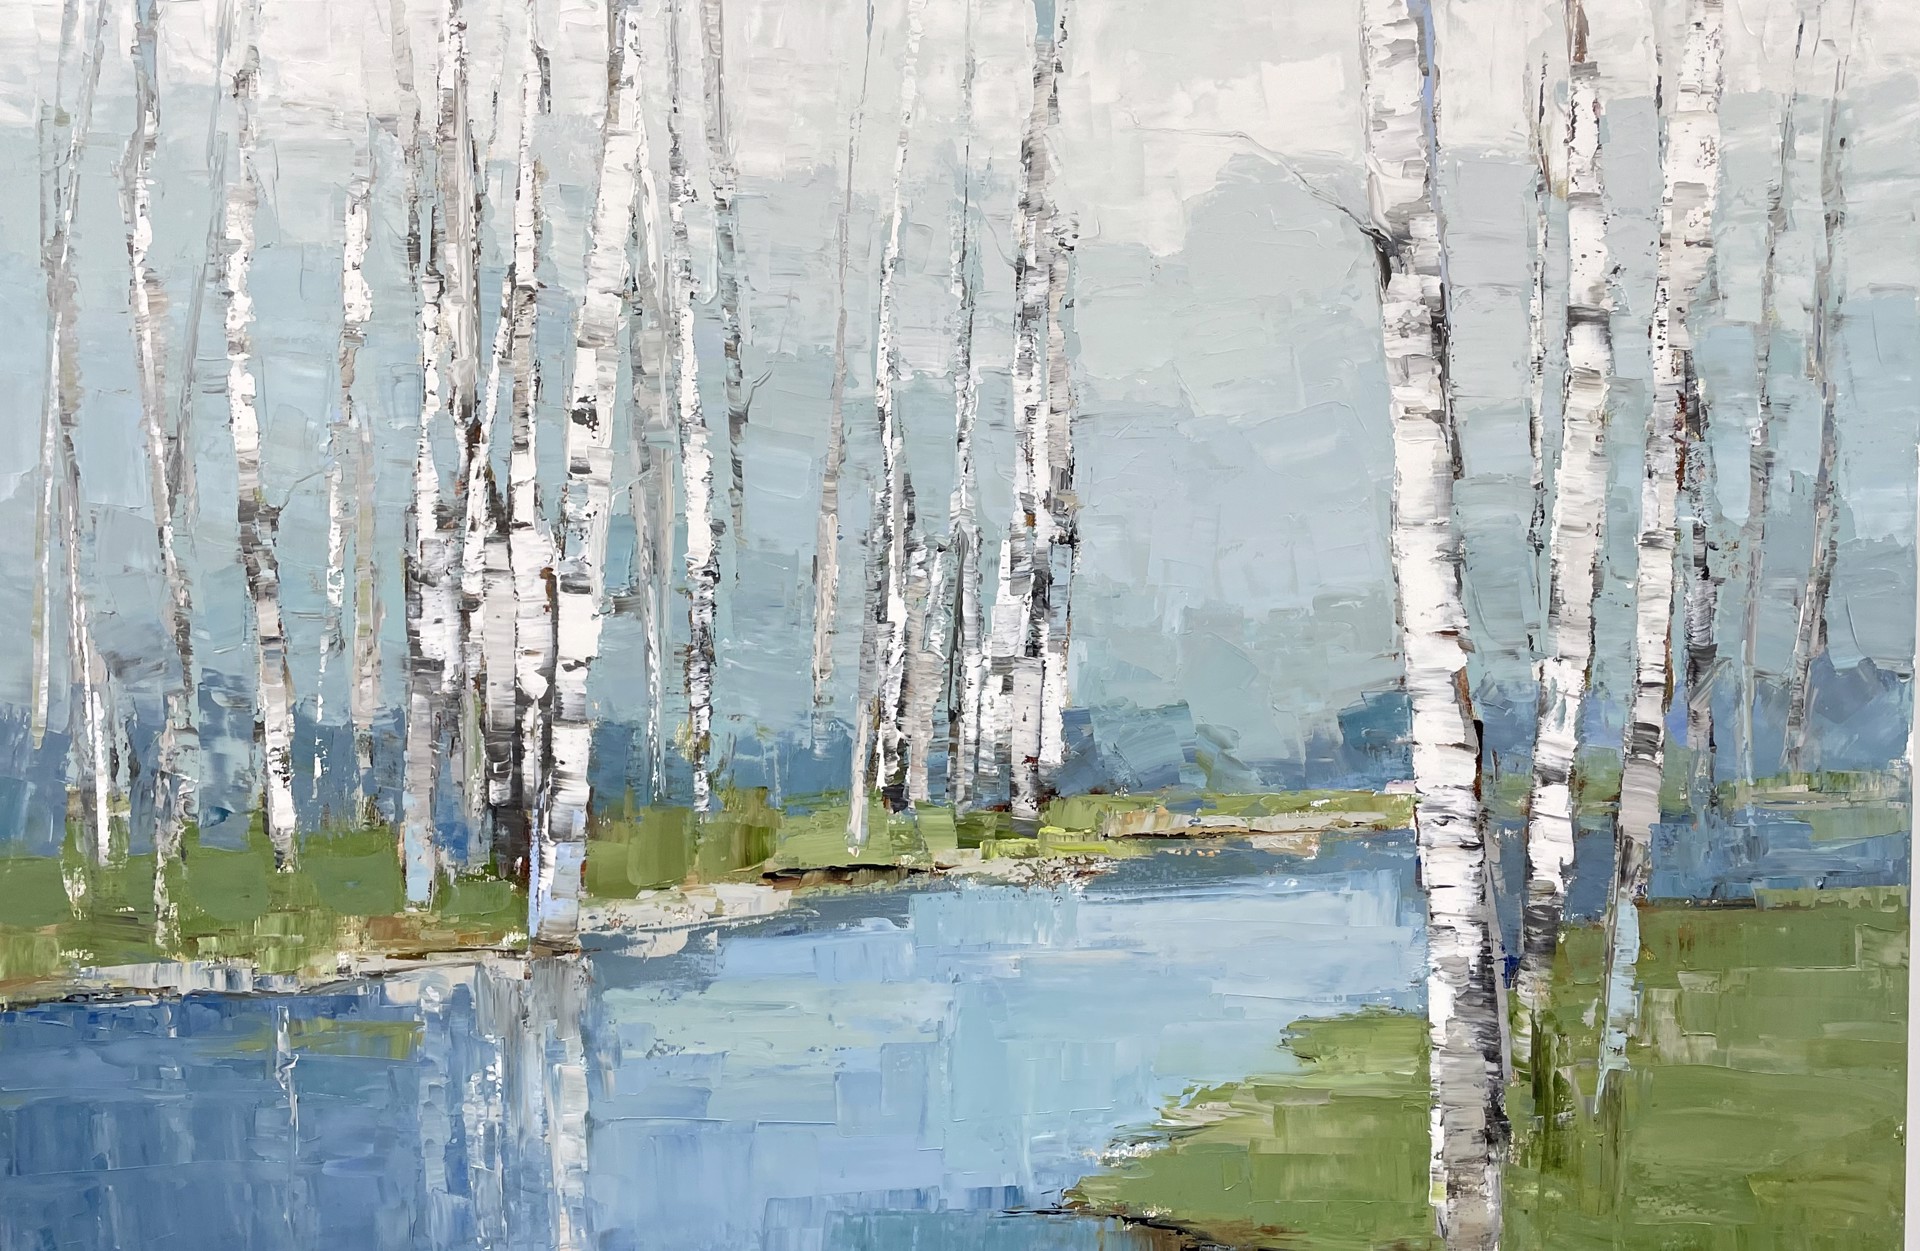 Birch Along The Water by Barbara Flowers